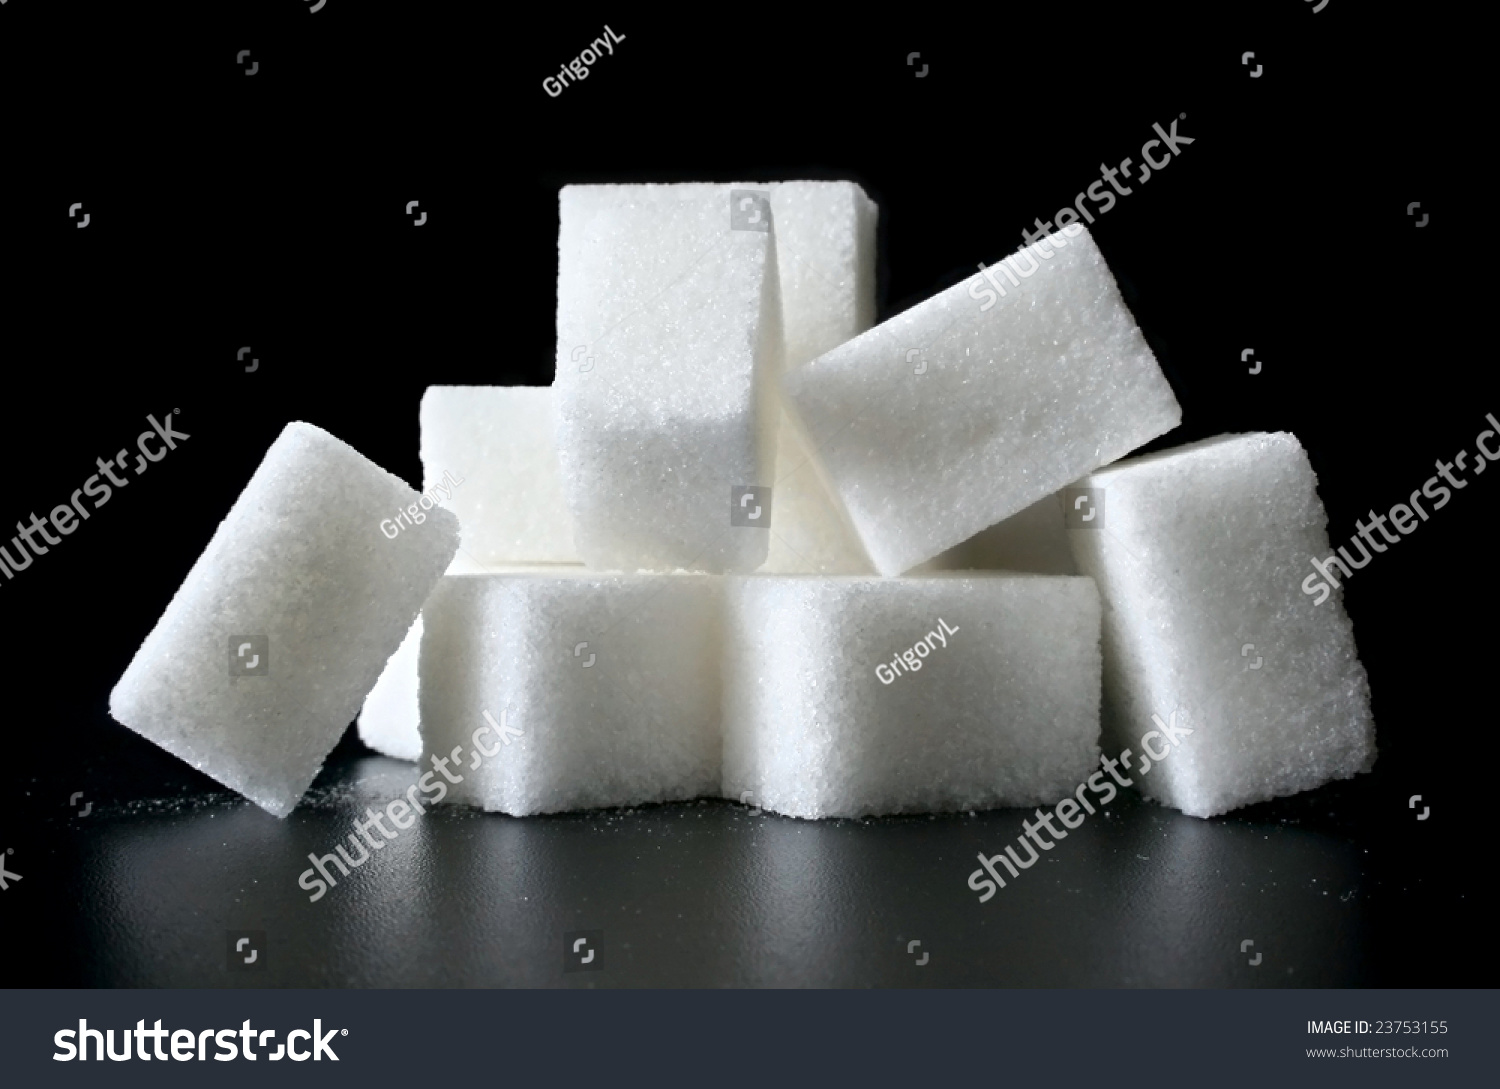 Pieces Of Sugar On A White Background. Stock Photo 23753155 : Shutterstock